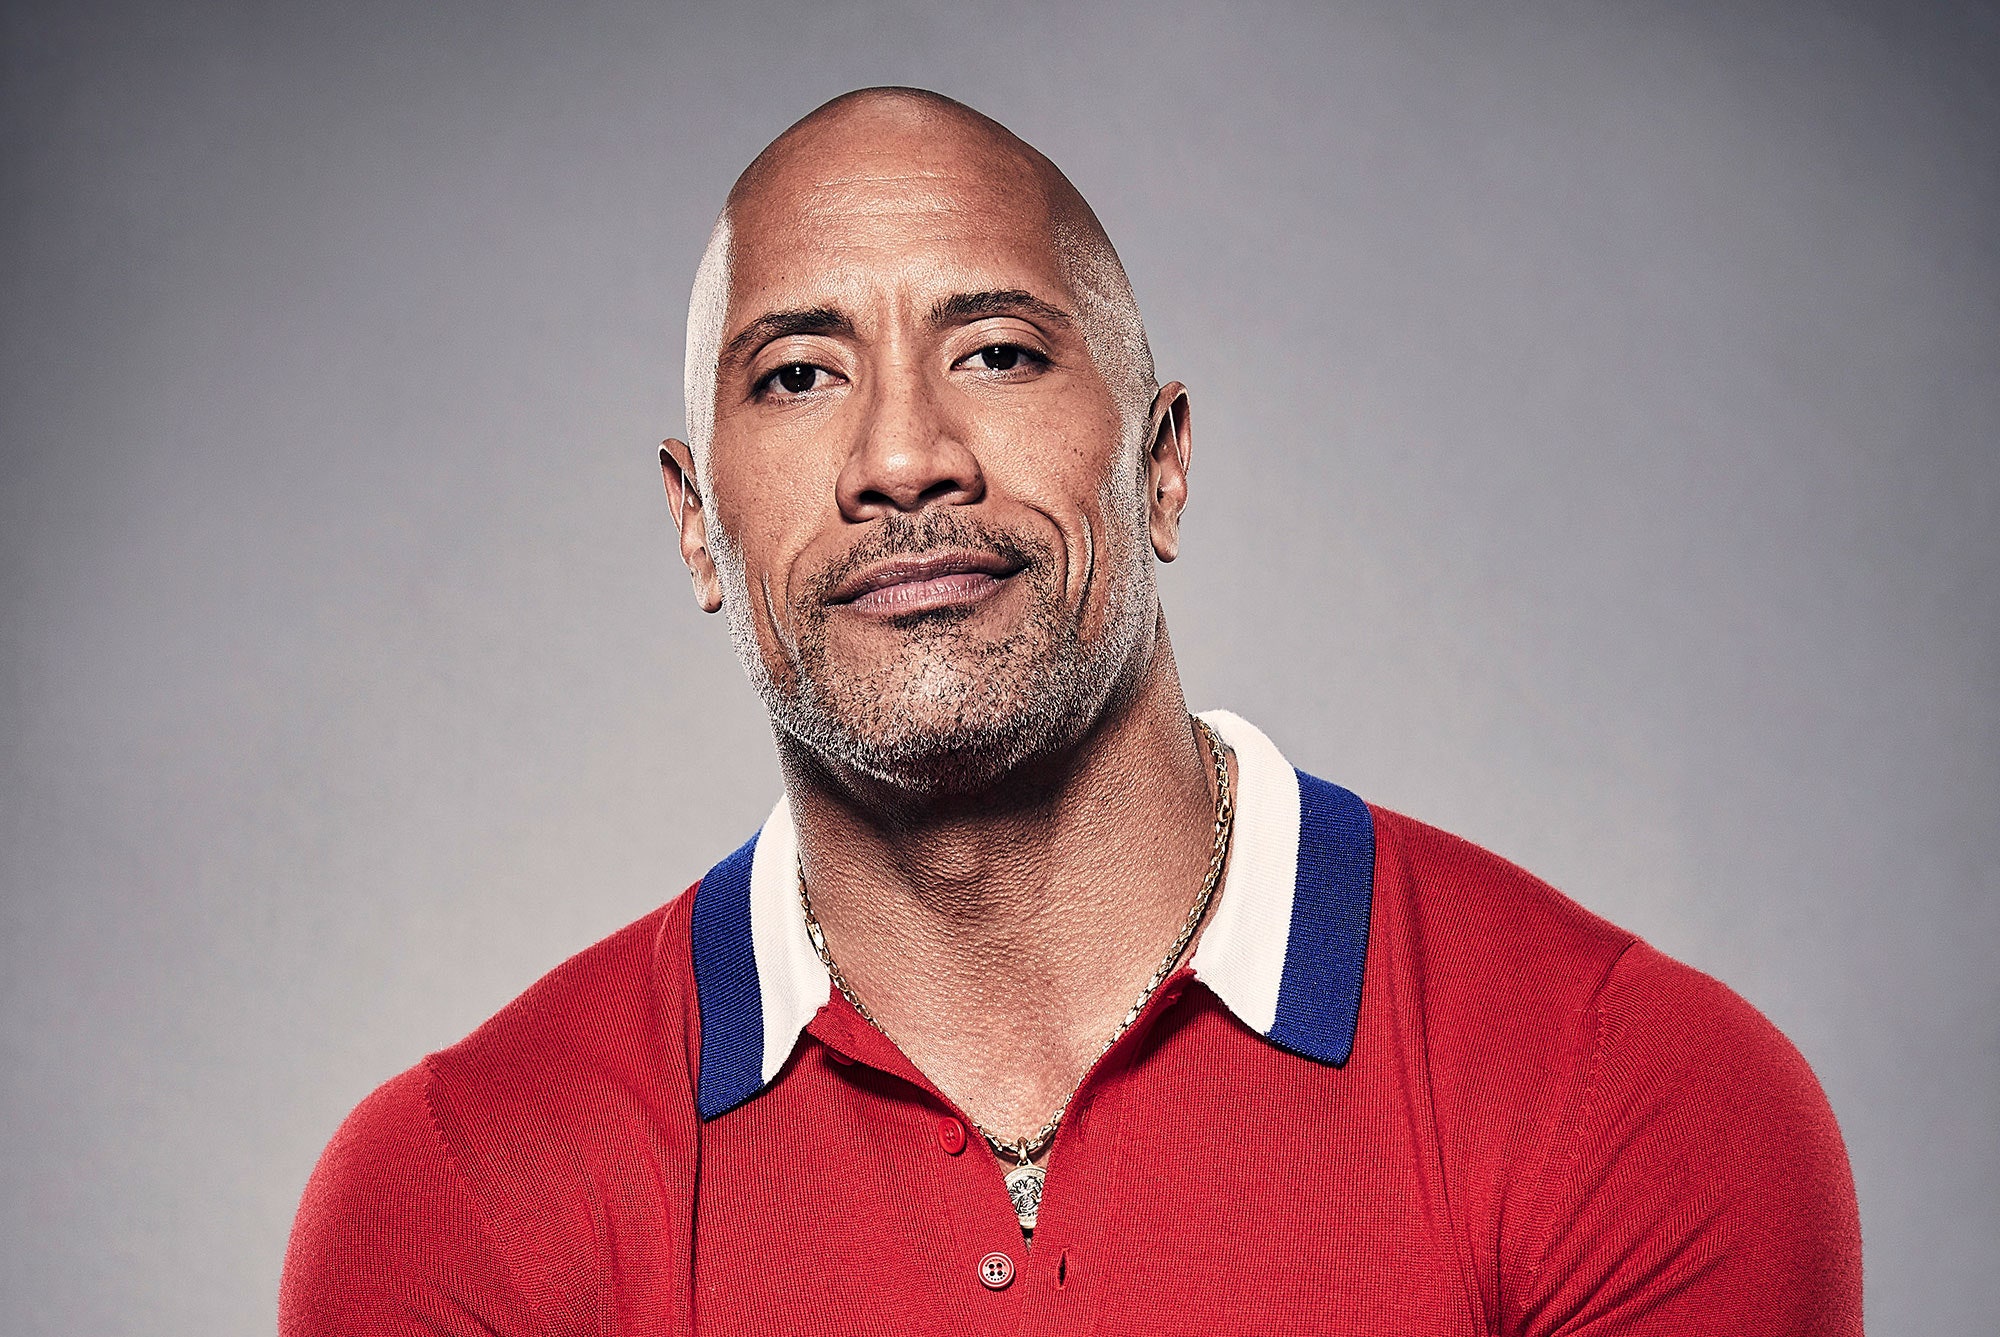 Dwayne Johnson Net Worth, Early Life, Career, Wife, Children, and More